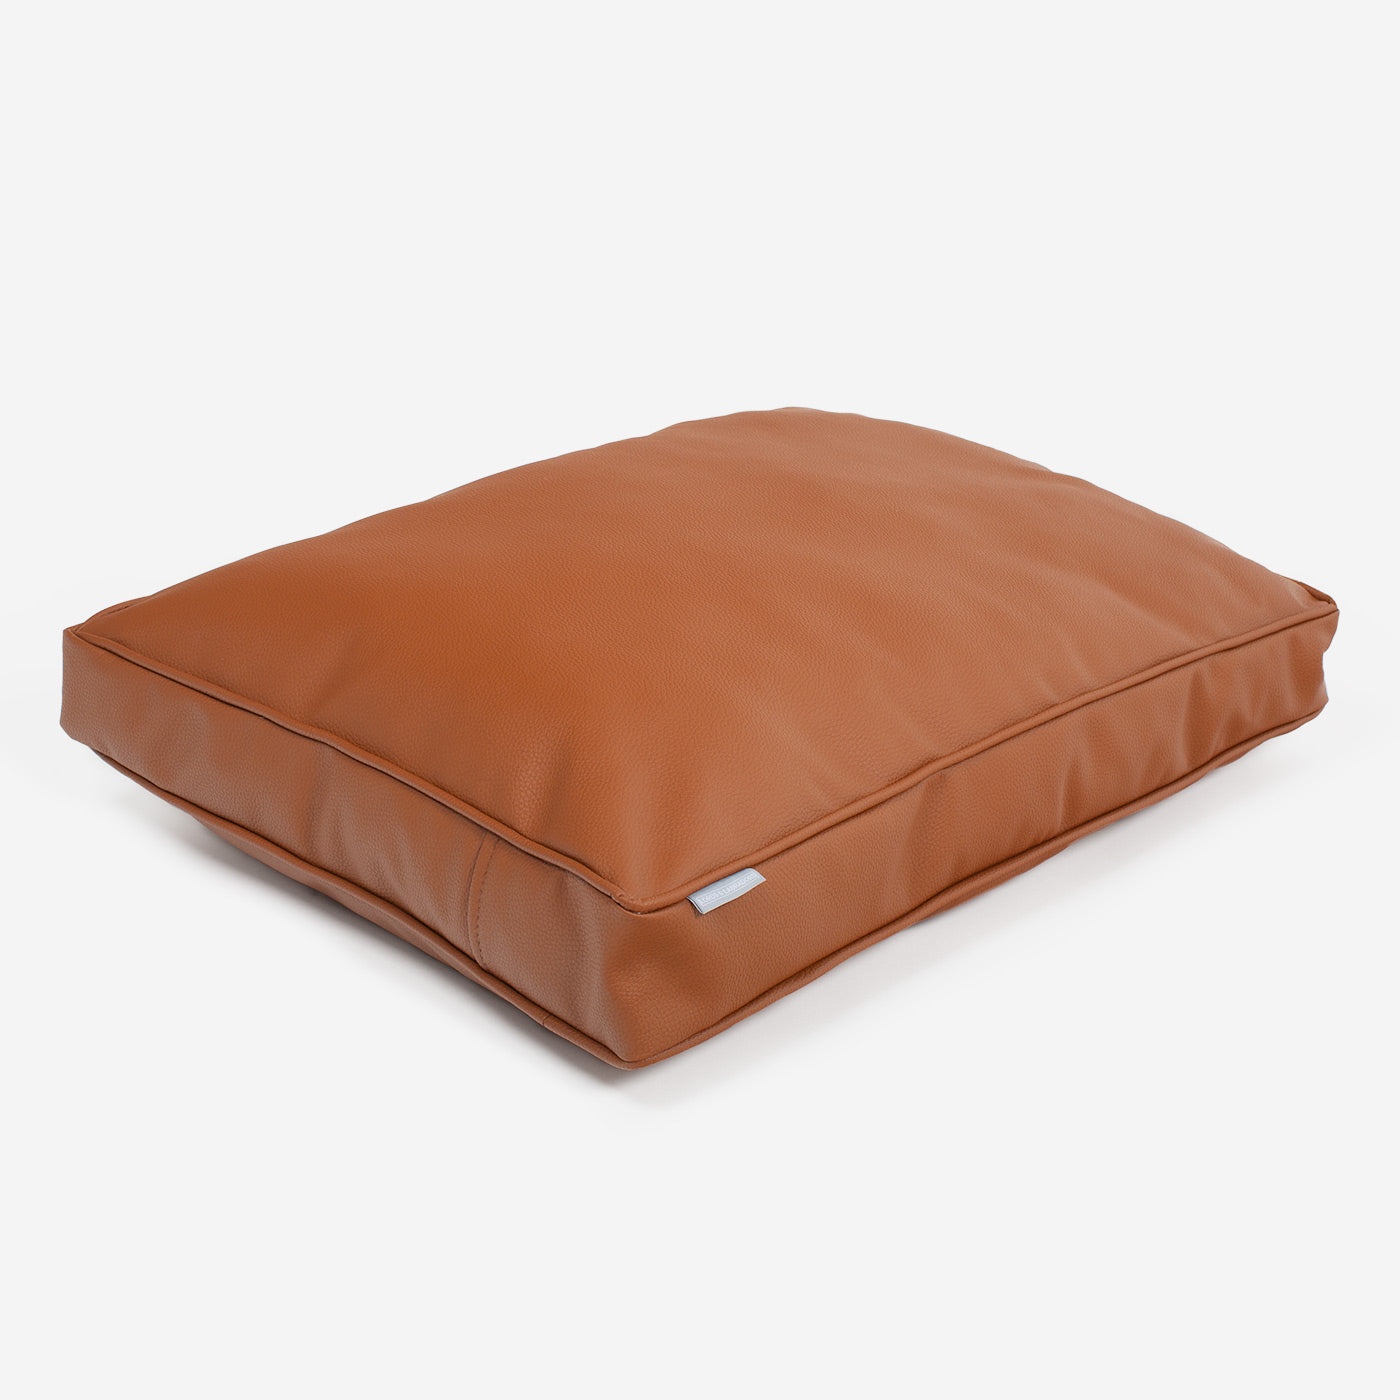 [color:ember] Luxury Dog Cushion in Rhino Tough Ember Faux Leather, The Perfect Pet Bed Time Accessory! Available Now at Lords & Labradors